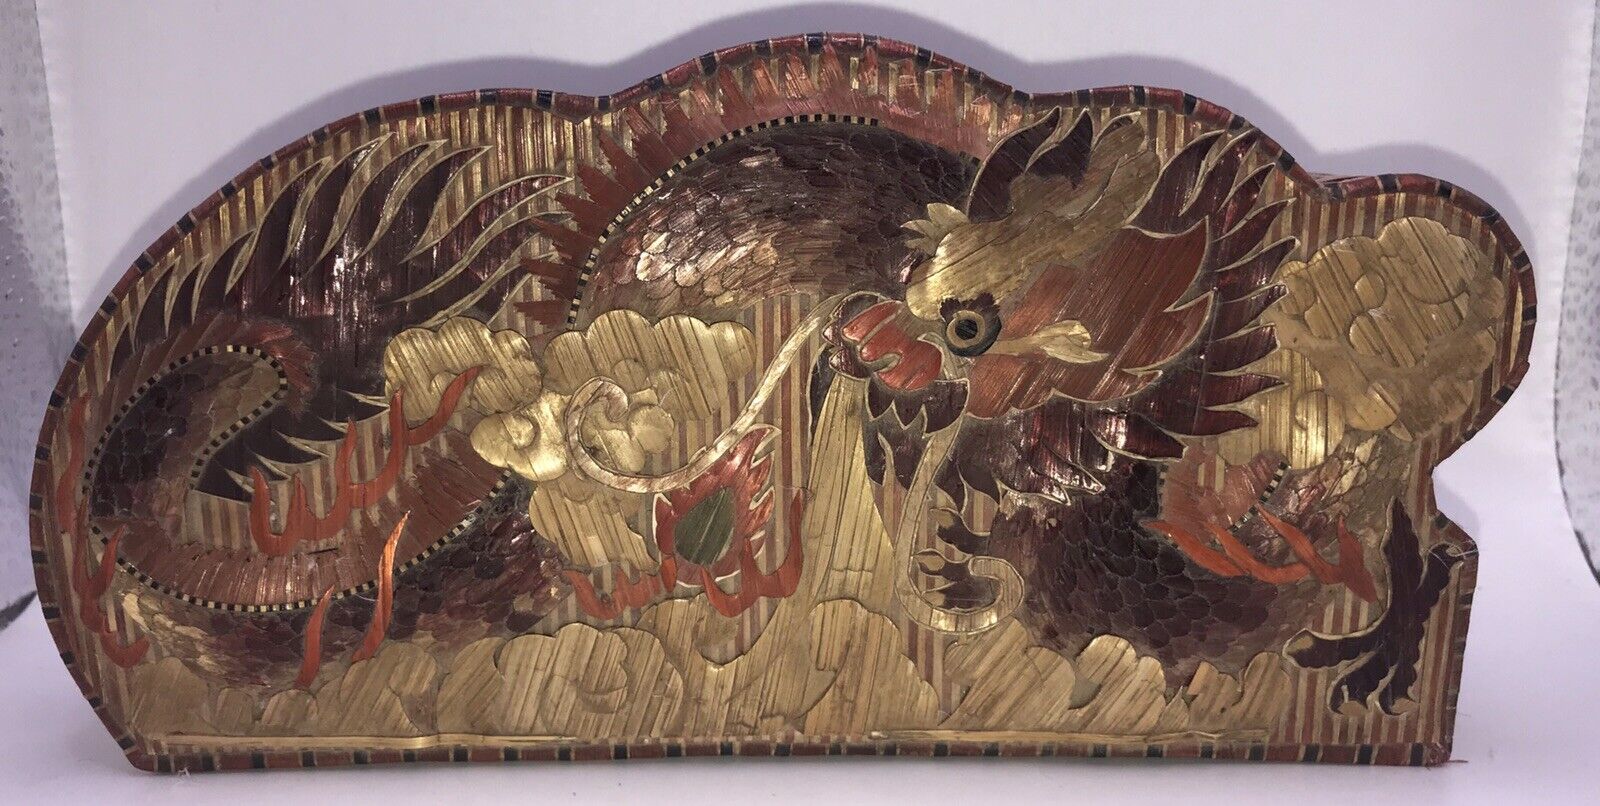 Chinese Lacquer Woven Straw / Bamboo Large Dragon Trinket Dresser Jewelry Box